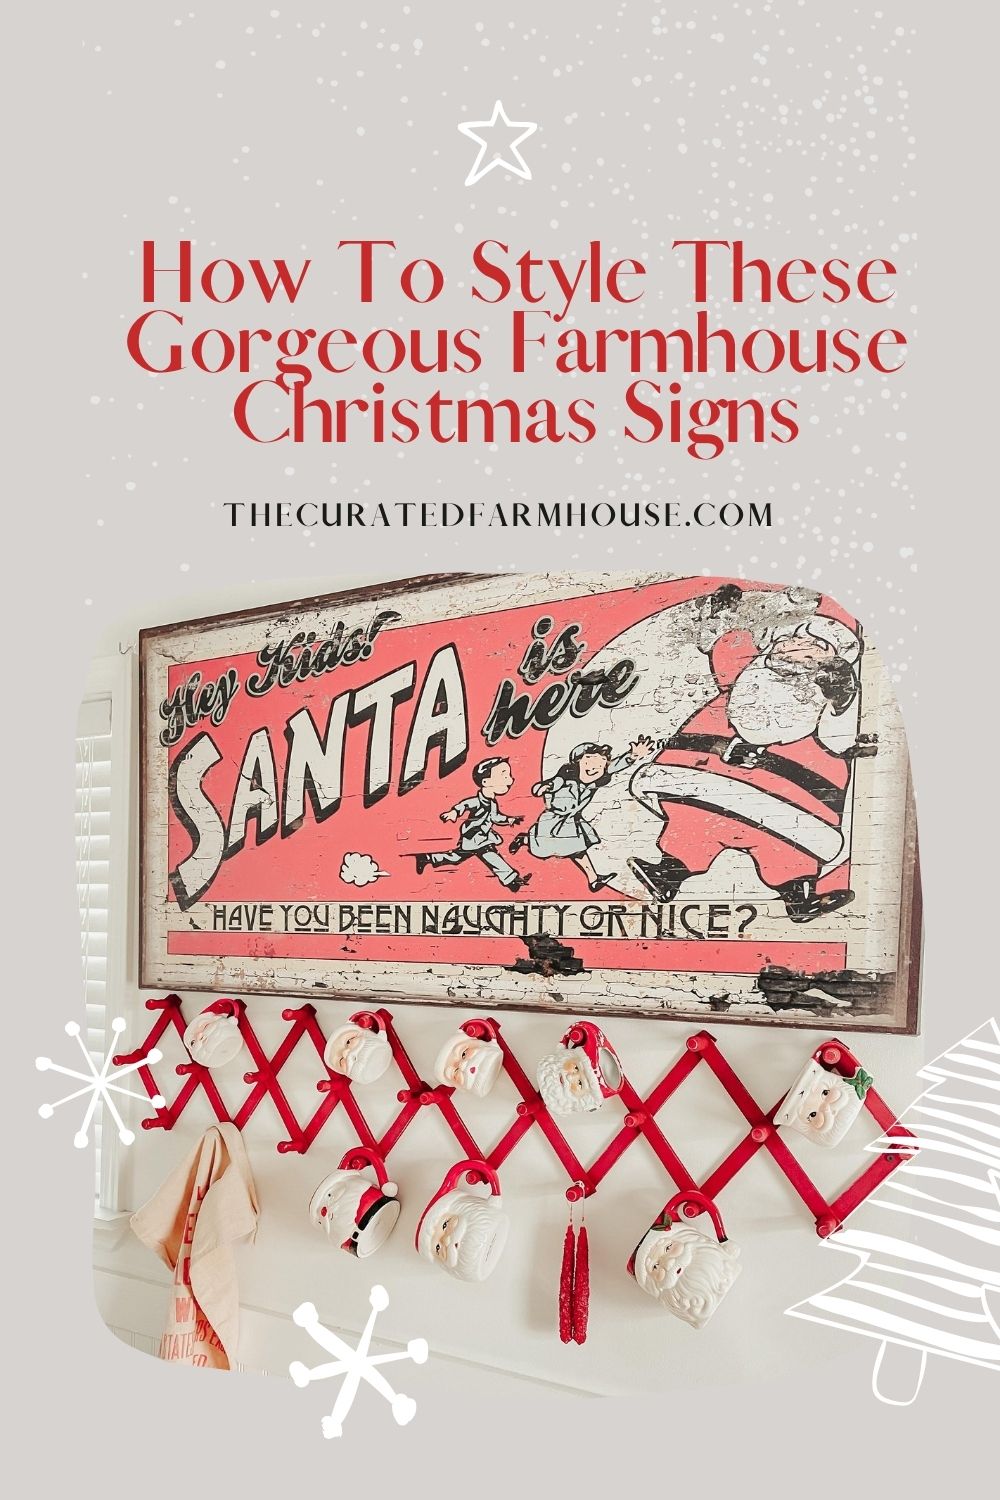 How To Style These Gorgeous Farmhouse Christmas Signs